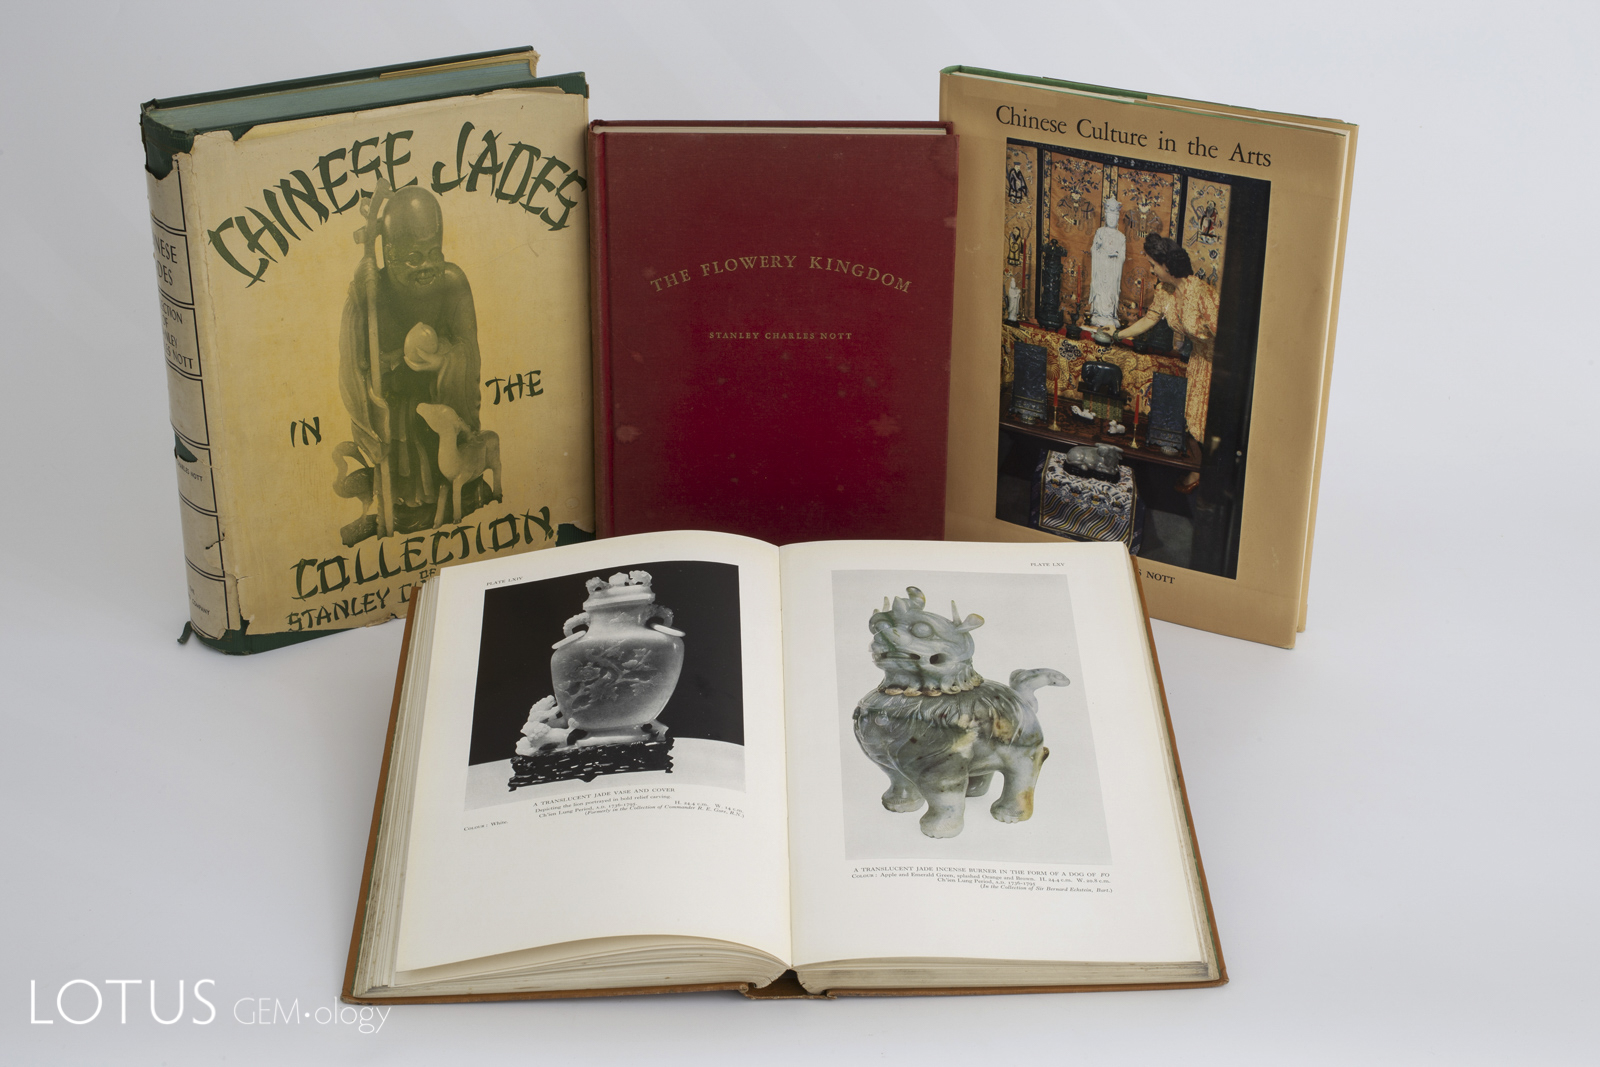 Charles Stanley Nott was perhaps the most prolific 20th century writer on jade. Here are four of his most collectable titles. In the foreground is his 1936 Chinese Jade Throughout the Ages. Note that two of these books feature dust jackets, which adds value, as so many were discarded.